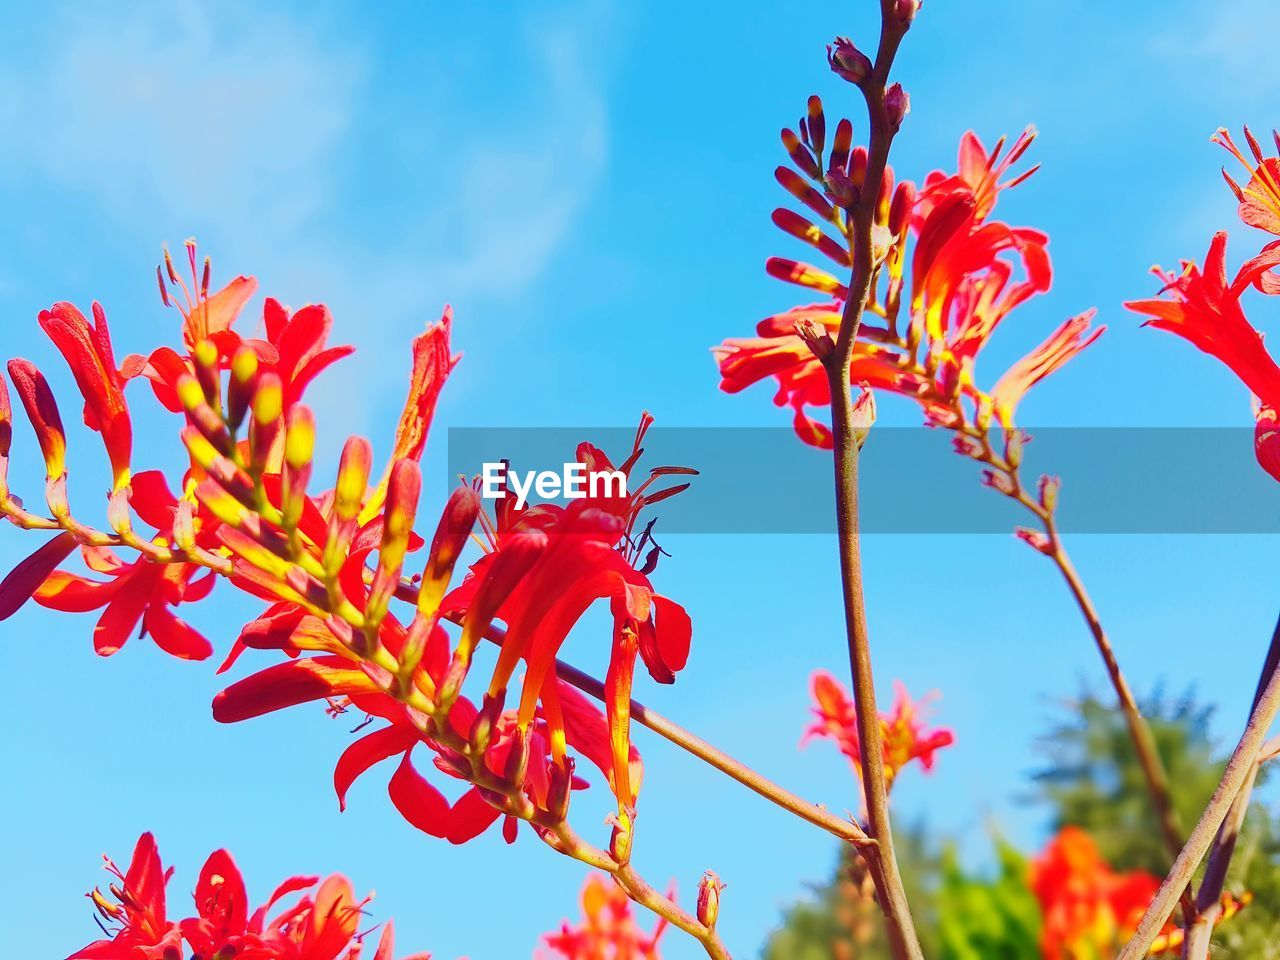 CLOSE-UP OF RED FLOWERING PLANTS AGAINST BLUE SKY